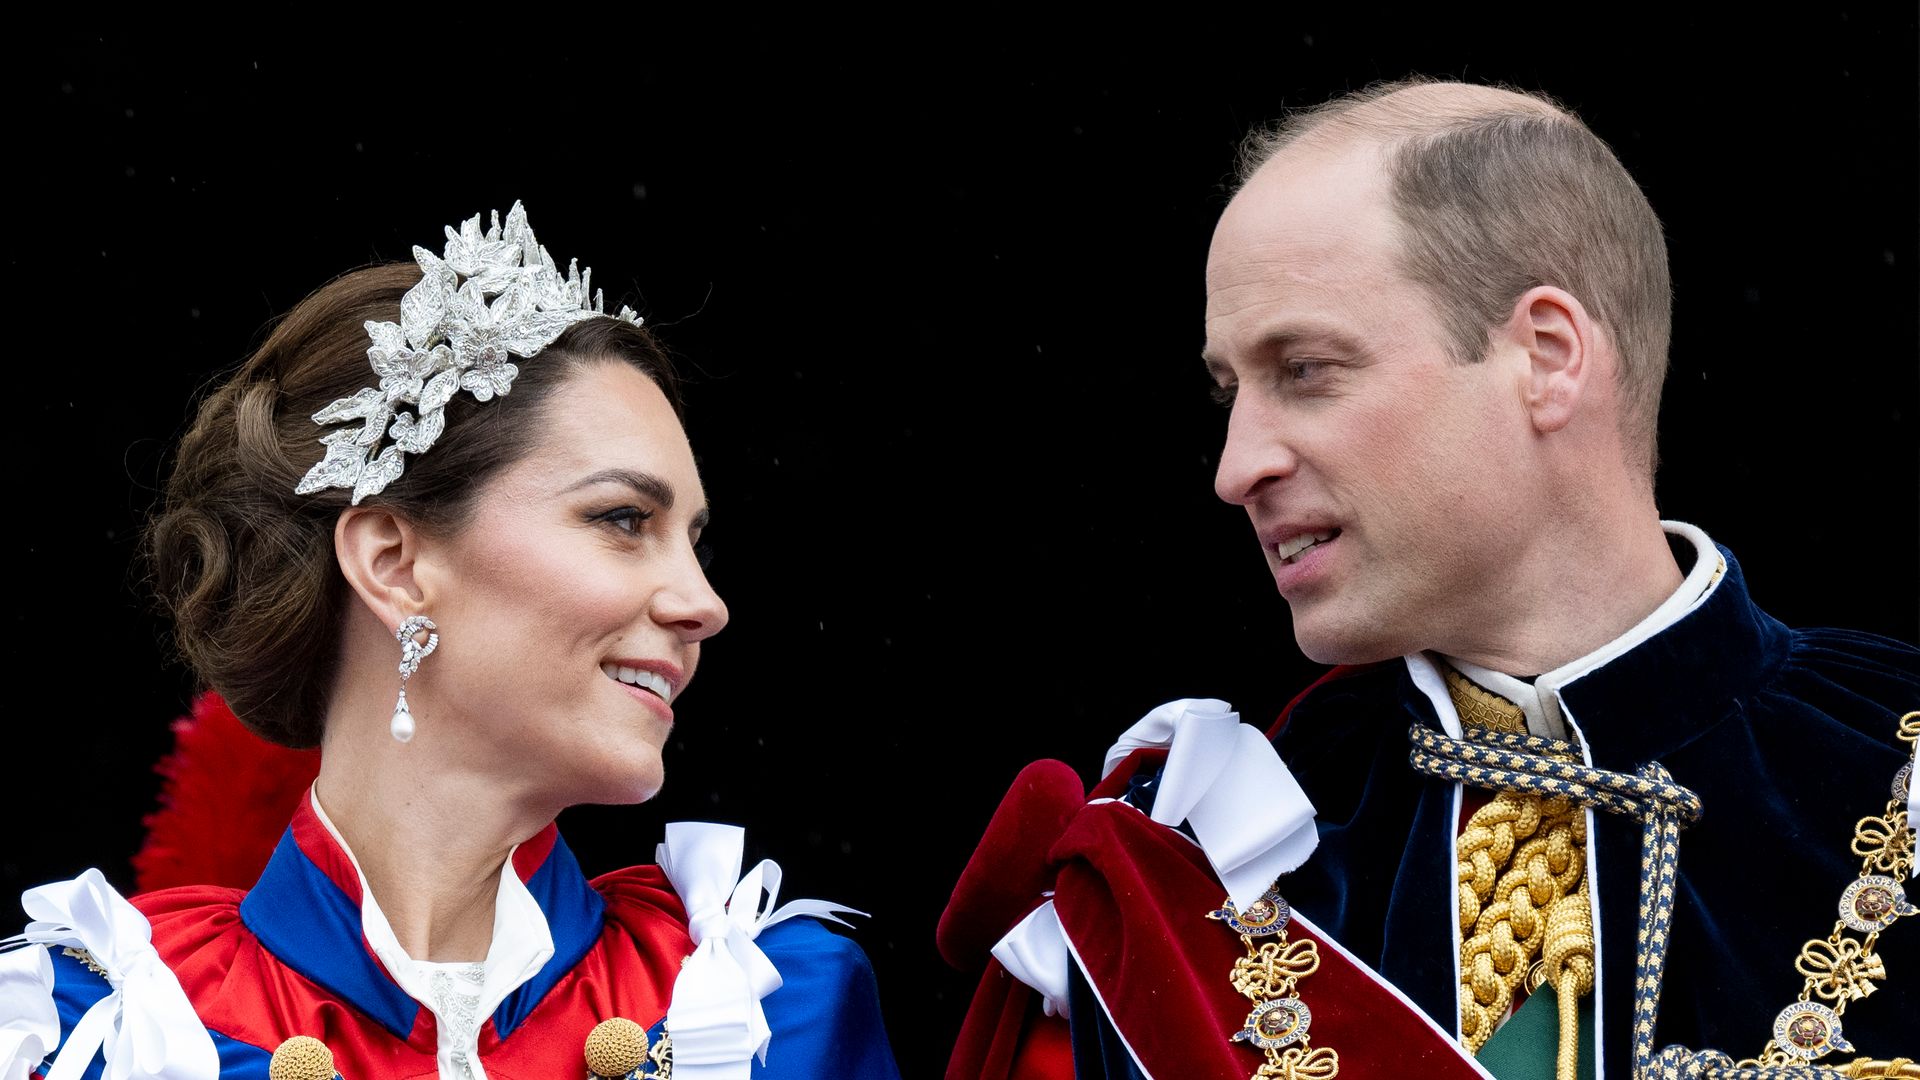 Prince William and Kate middleton look at each other